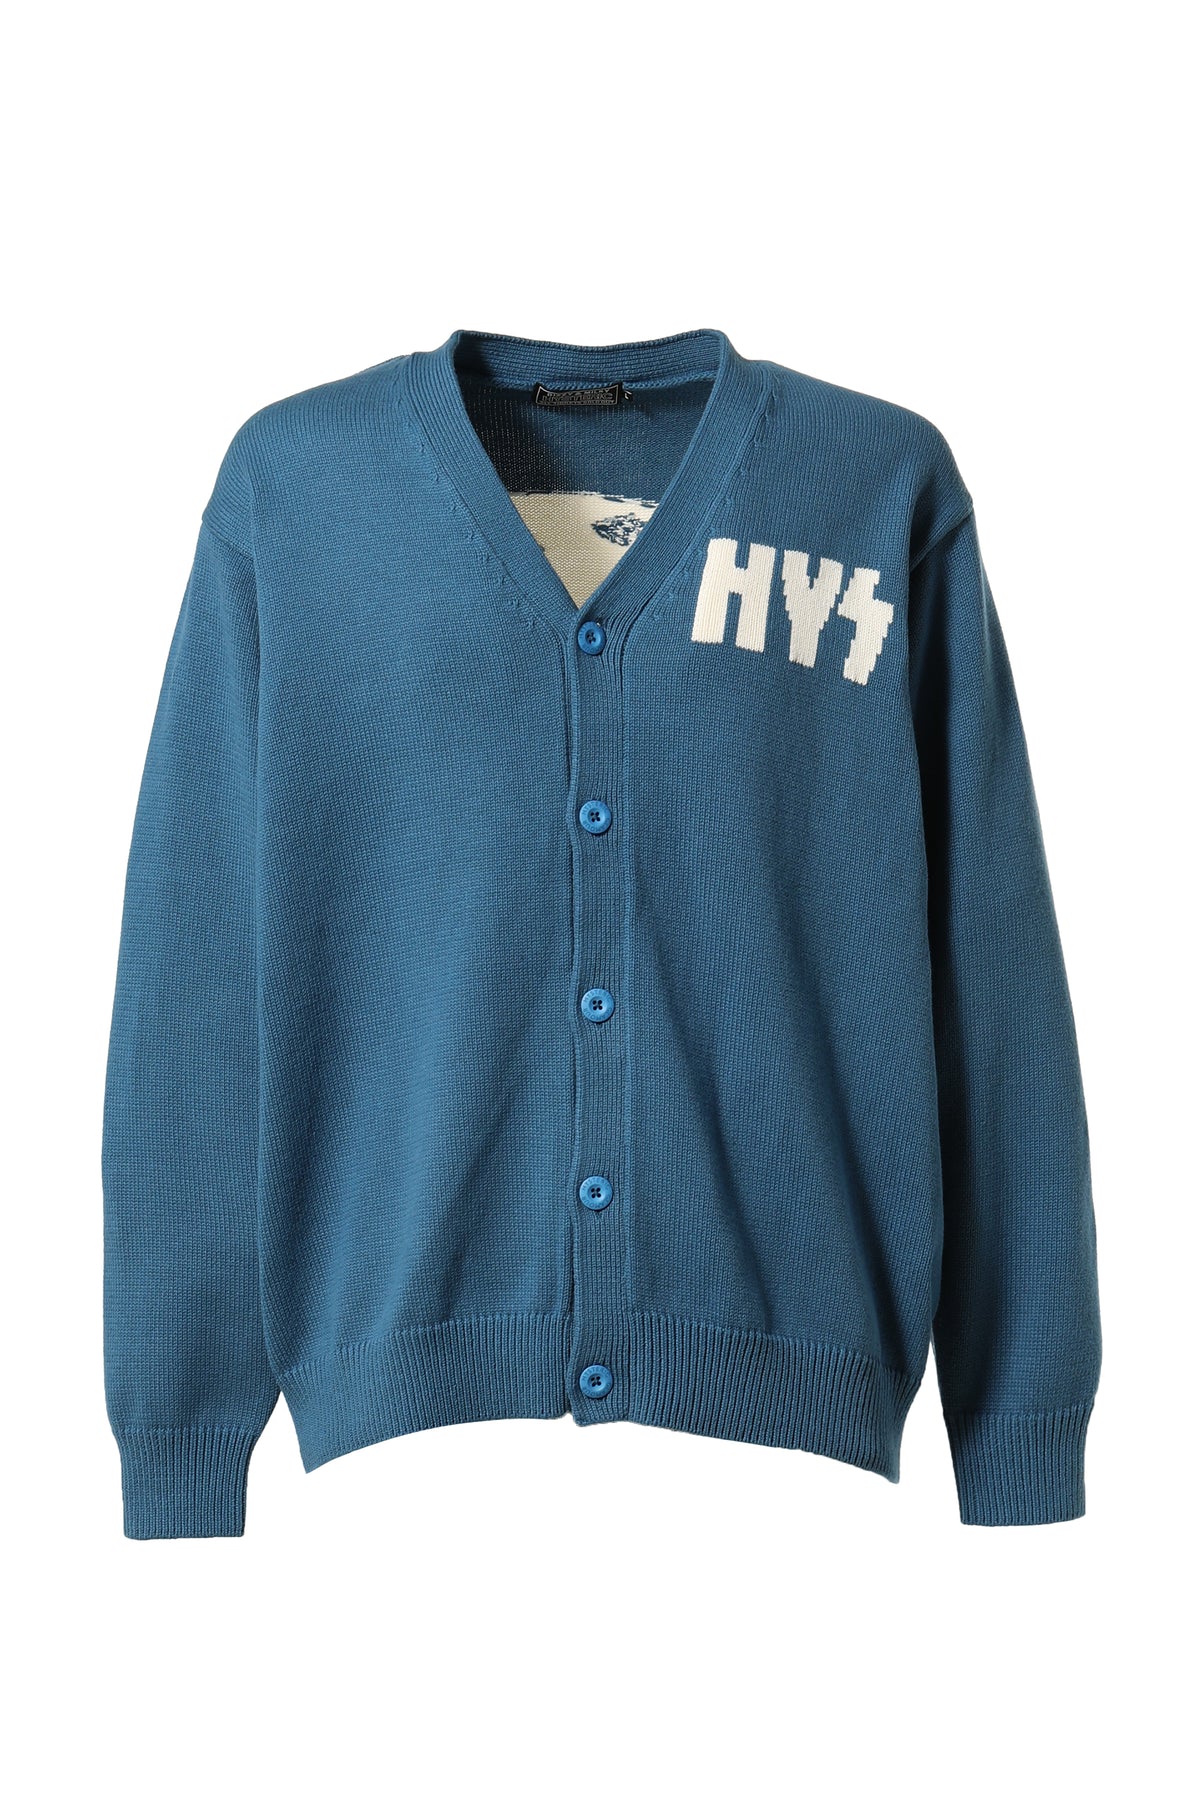 HYSTERIC GLAMOUR see no evil カーディガン　ヒス